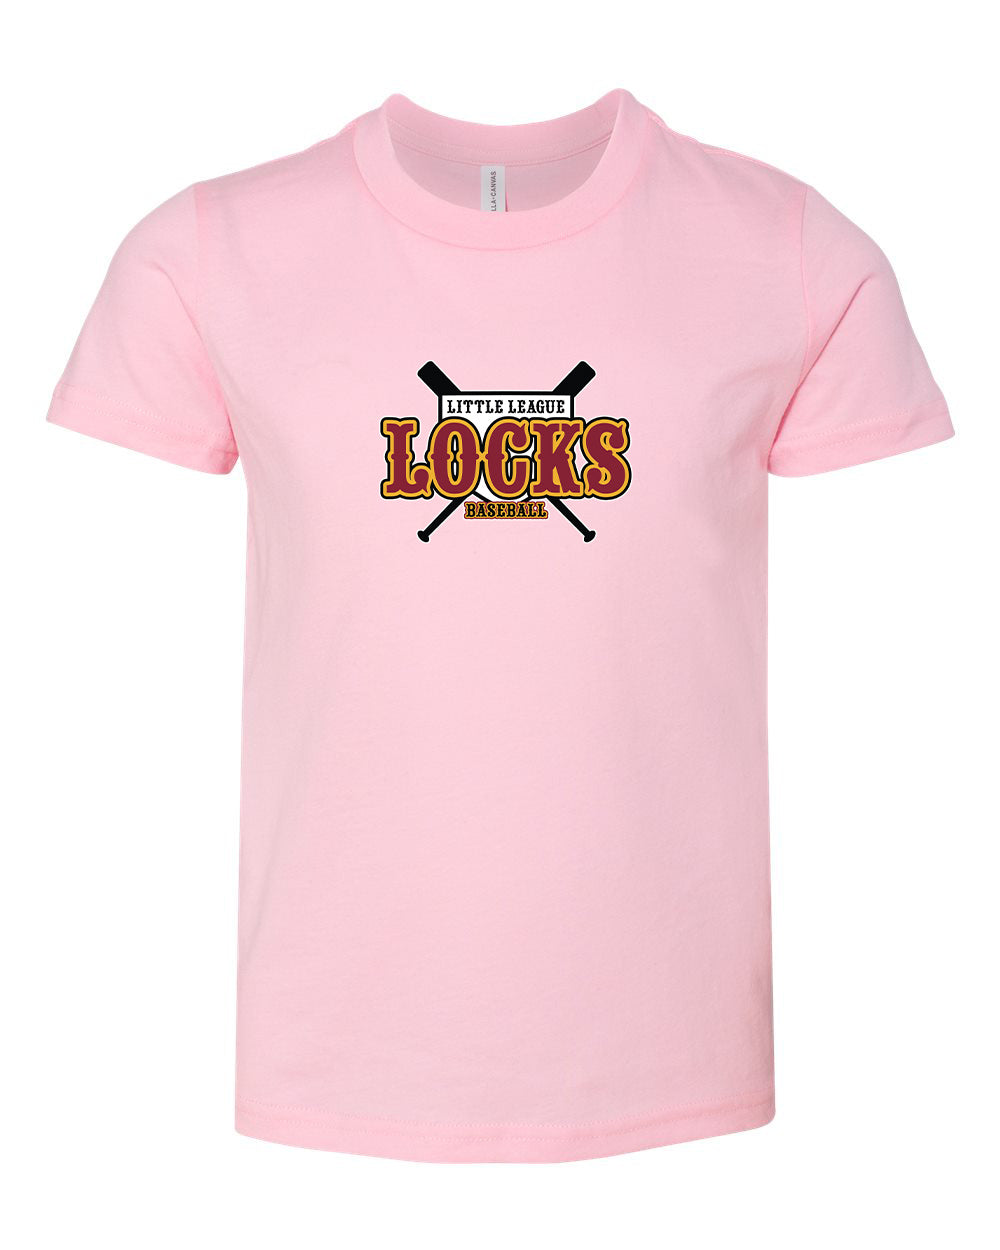 Locks Youth T-shirt "Classic Baseball" - 3001Y (color options available)